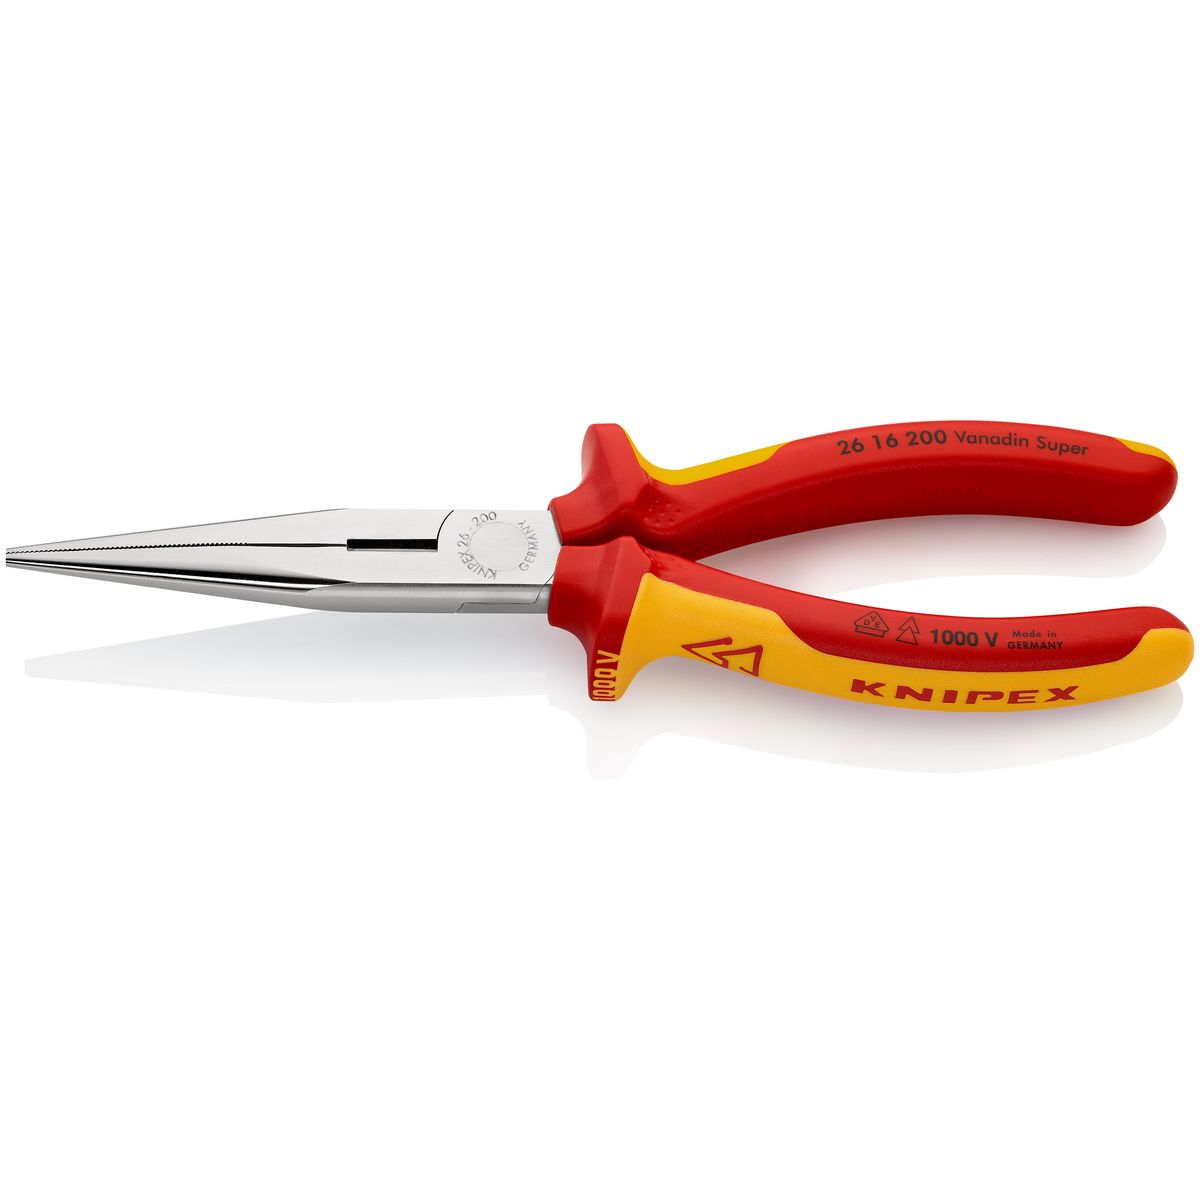 SNIPE NOSE SIDE CUTTING PLIERS 2616200 Knipex